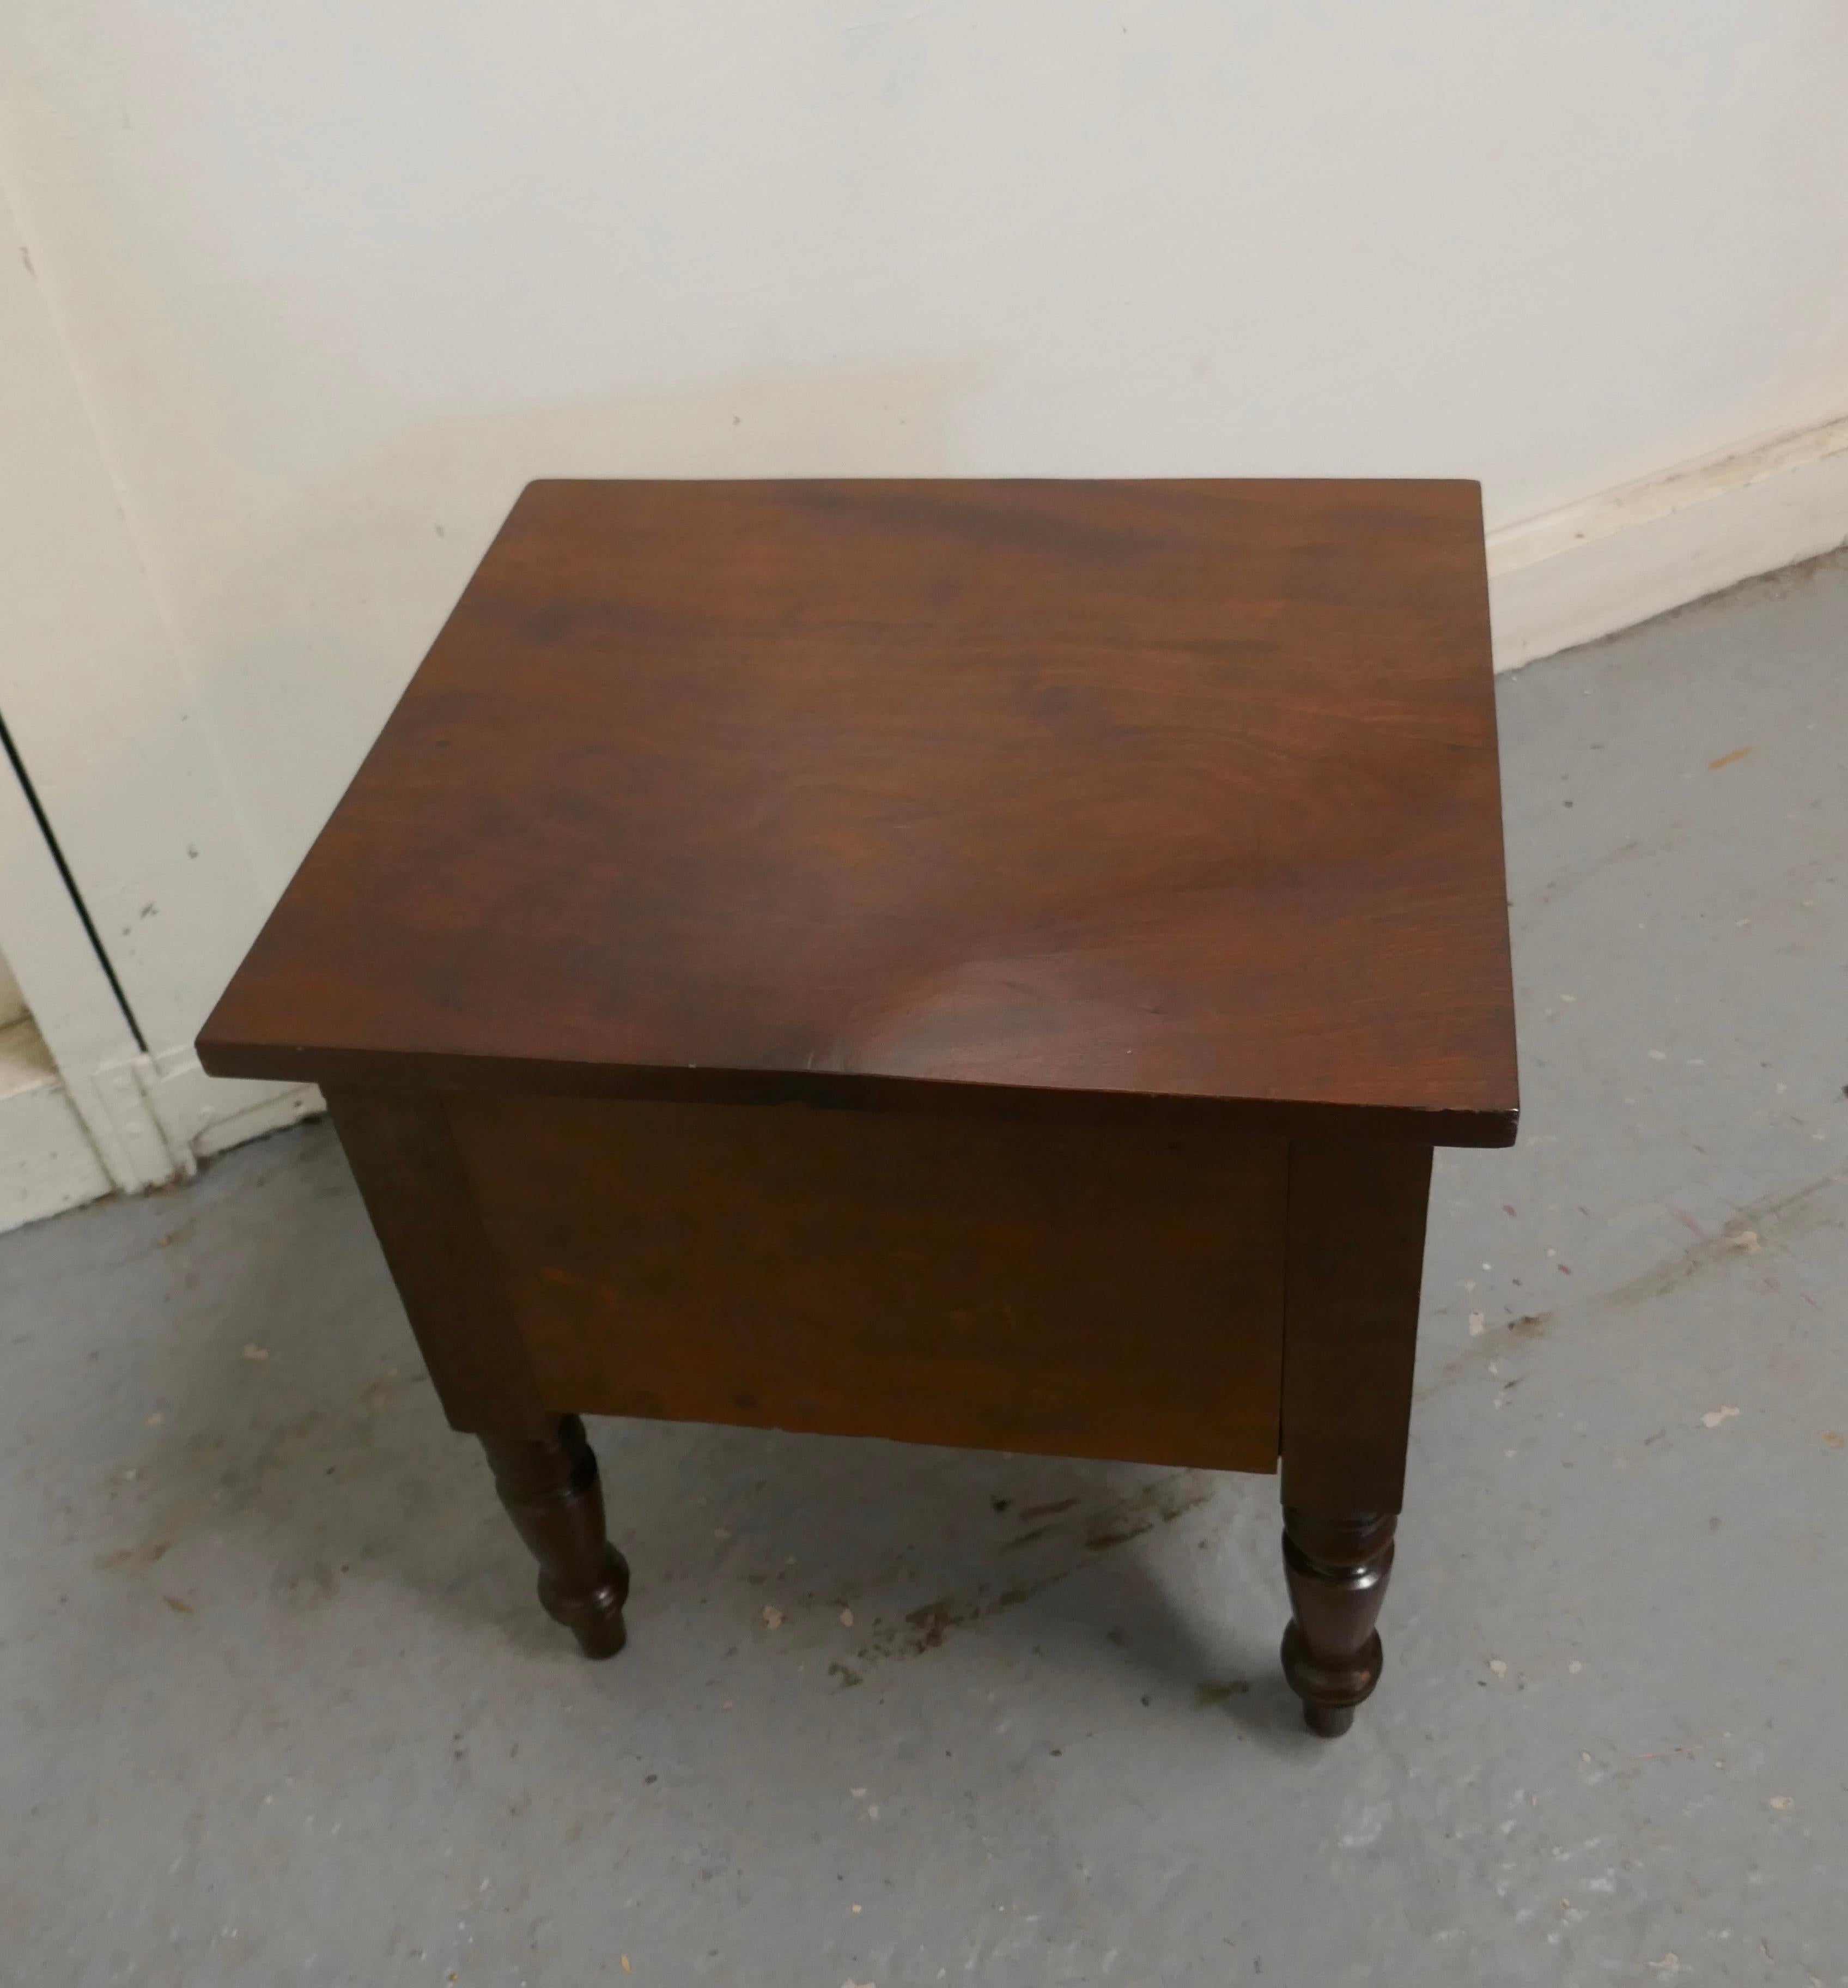 Mahogany Occasional Table with Storage Compartment In Good Condition For Sale In Chillerton, Isle of Wight